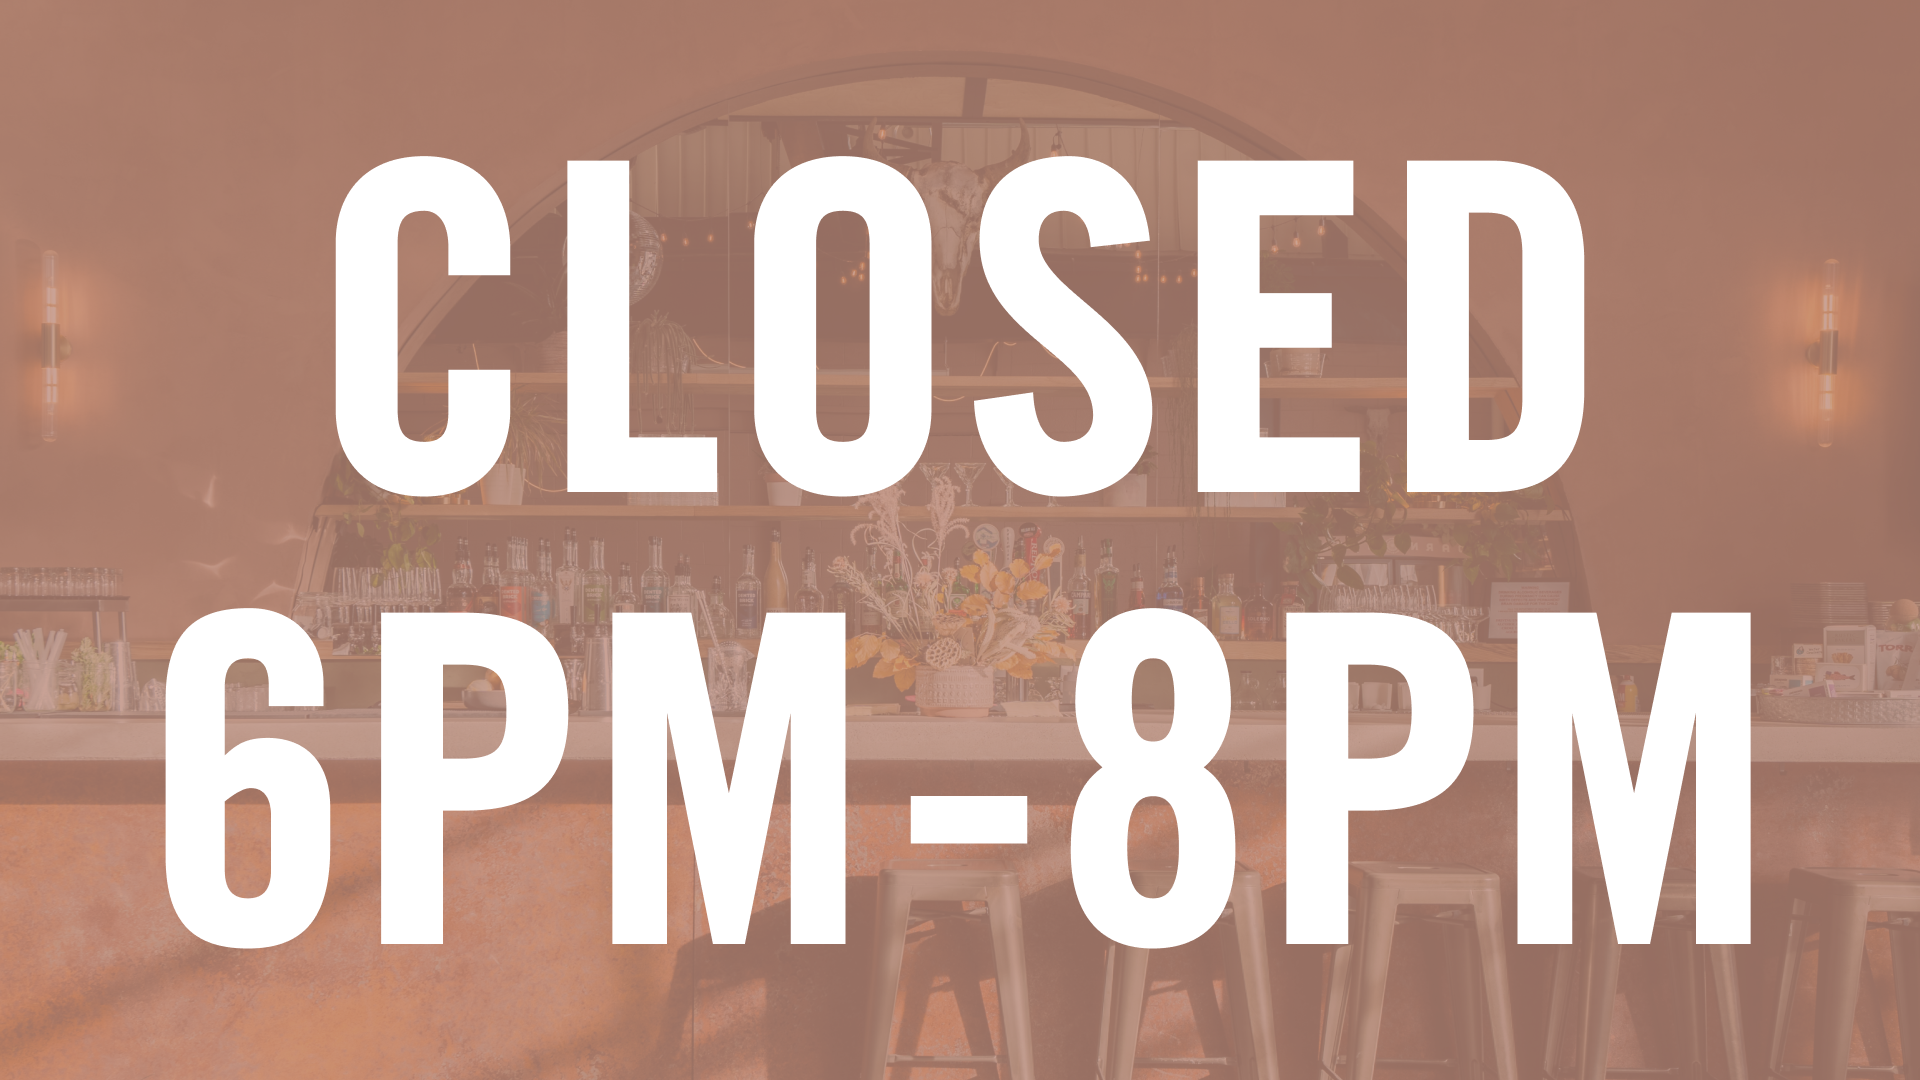 Taproom Closed from 6-8 PM